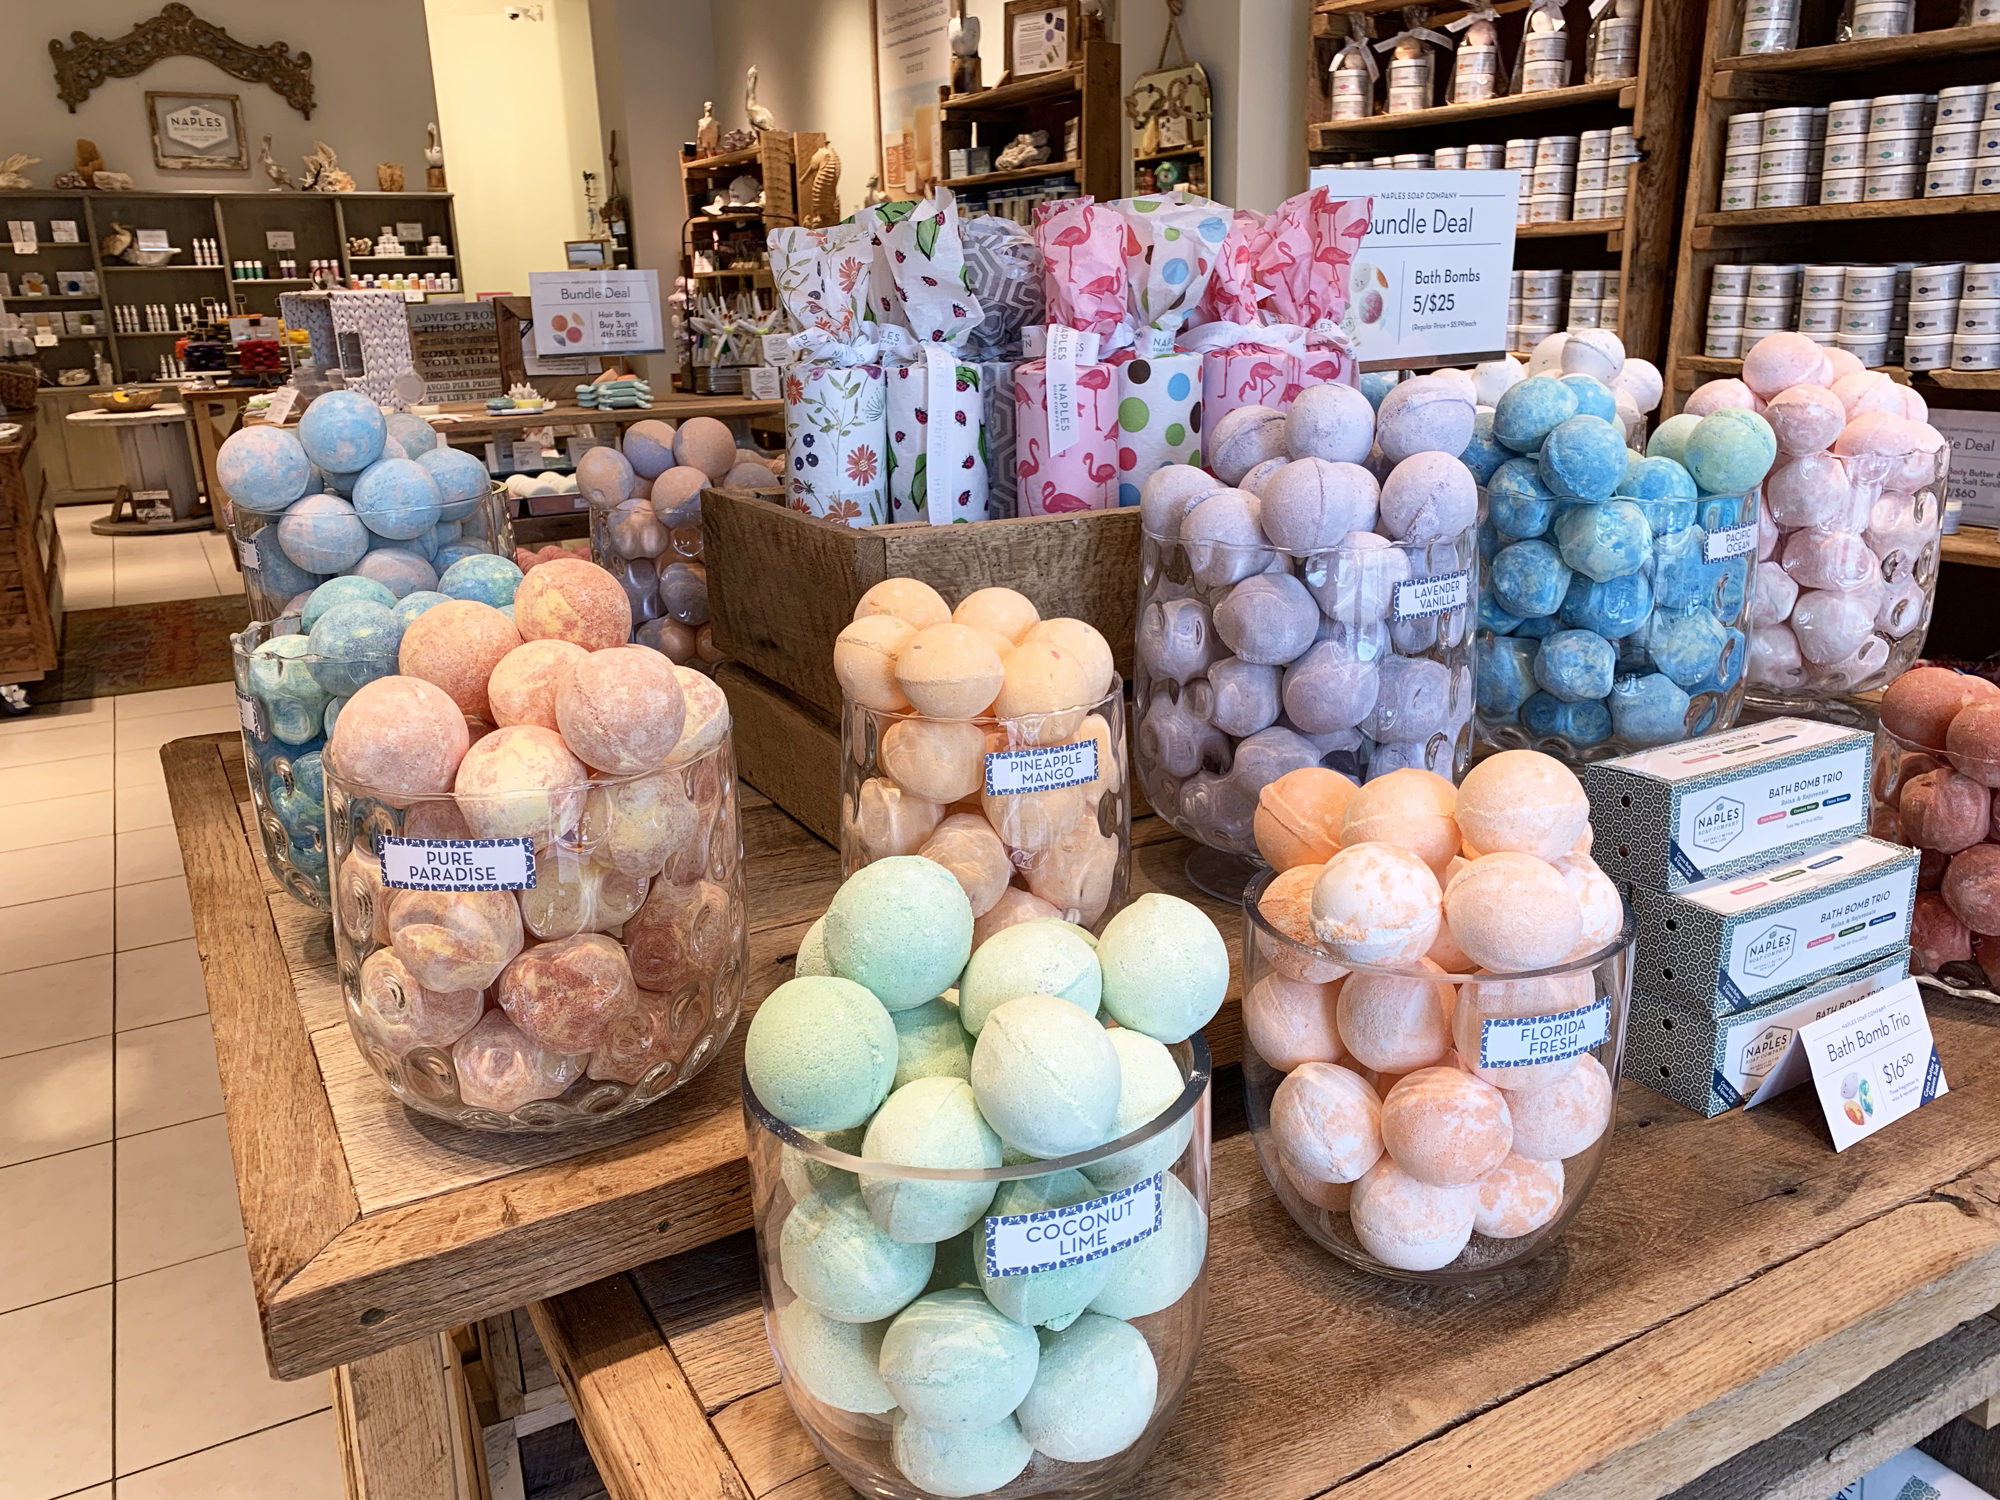 Courtesy. Naples Soap Co. sells soaps and skin care products for the body, face and hair, including products for people with sensitive skin.